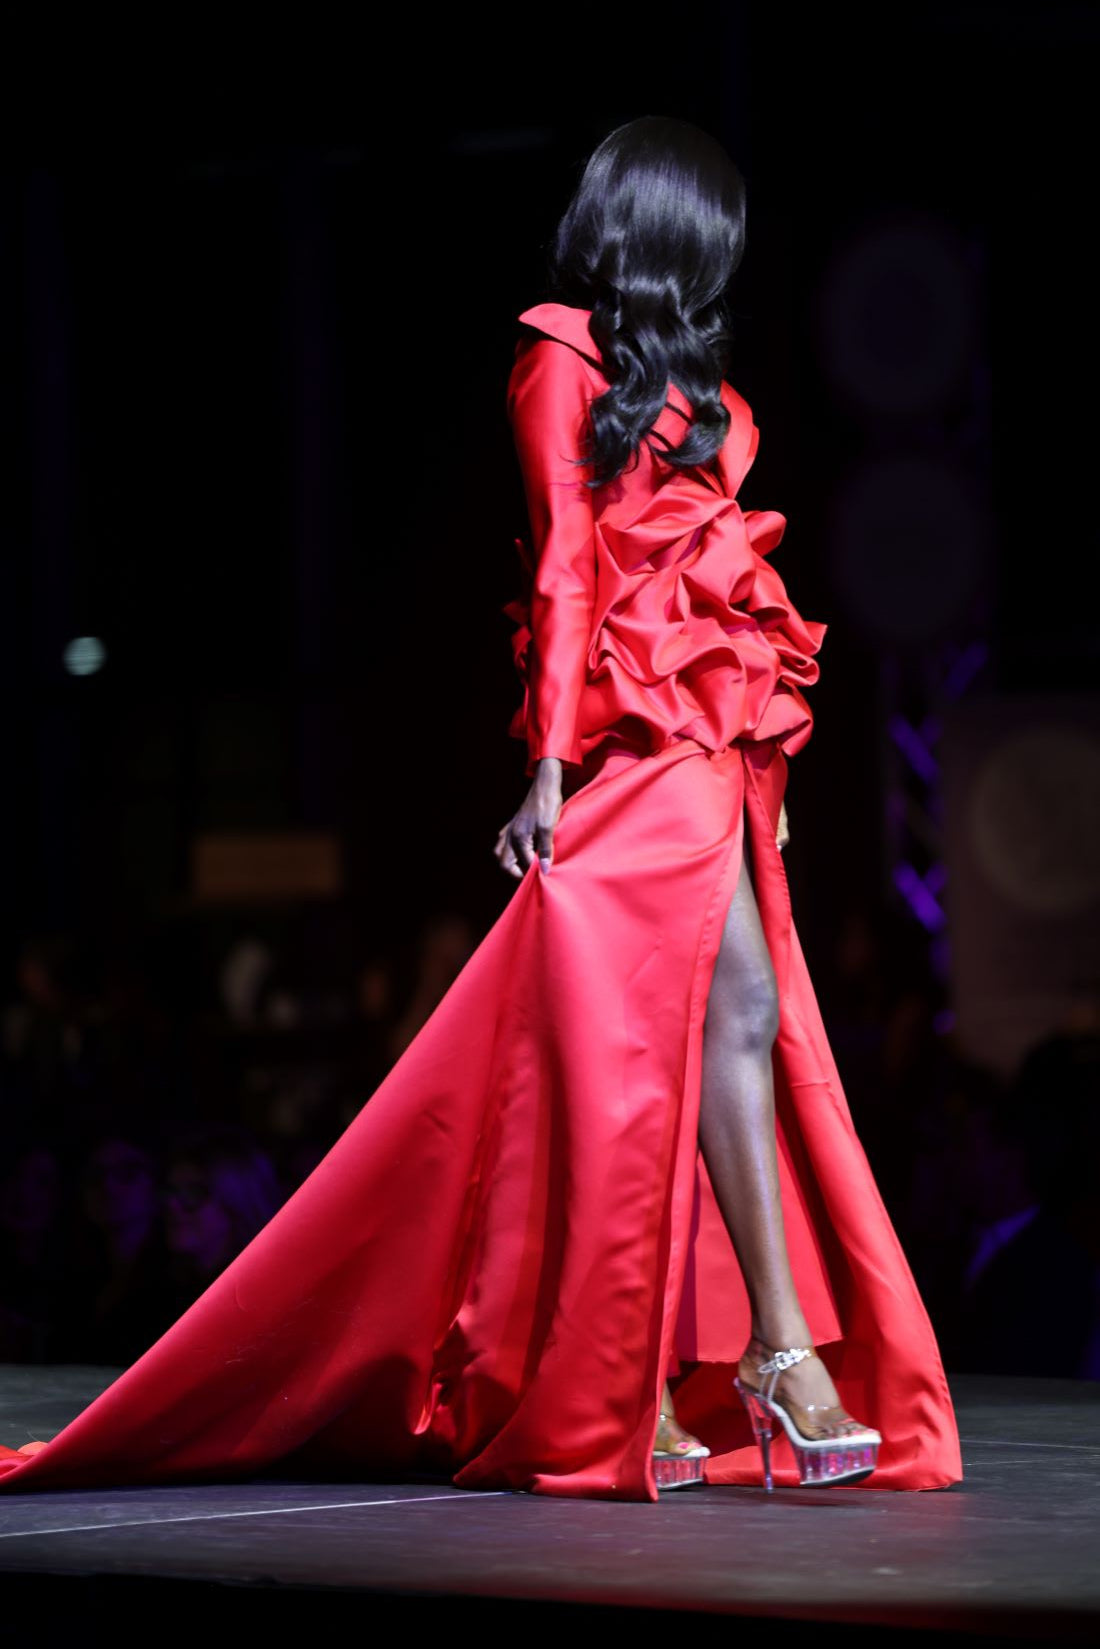 HOK House Of KLynn Couture Rich Satin Dramatic Red Luxury Ruffled Tuxedo Gown Flowing Train Evening Event Gala Vogue Runway Top Looks Lifestyle Holiday Party New Years Eve Red Carpet Style Inspiration Designer Old Money Award Show Winner Nominees IMDB